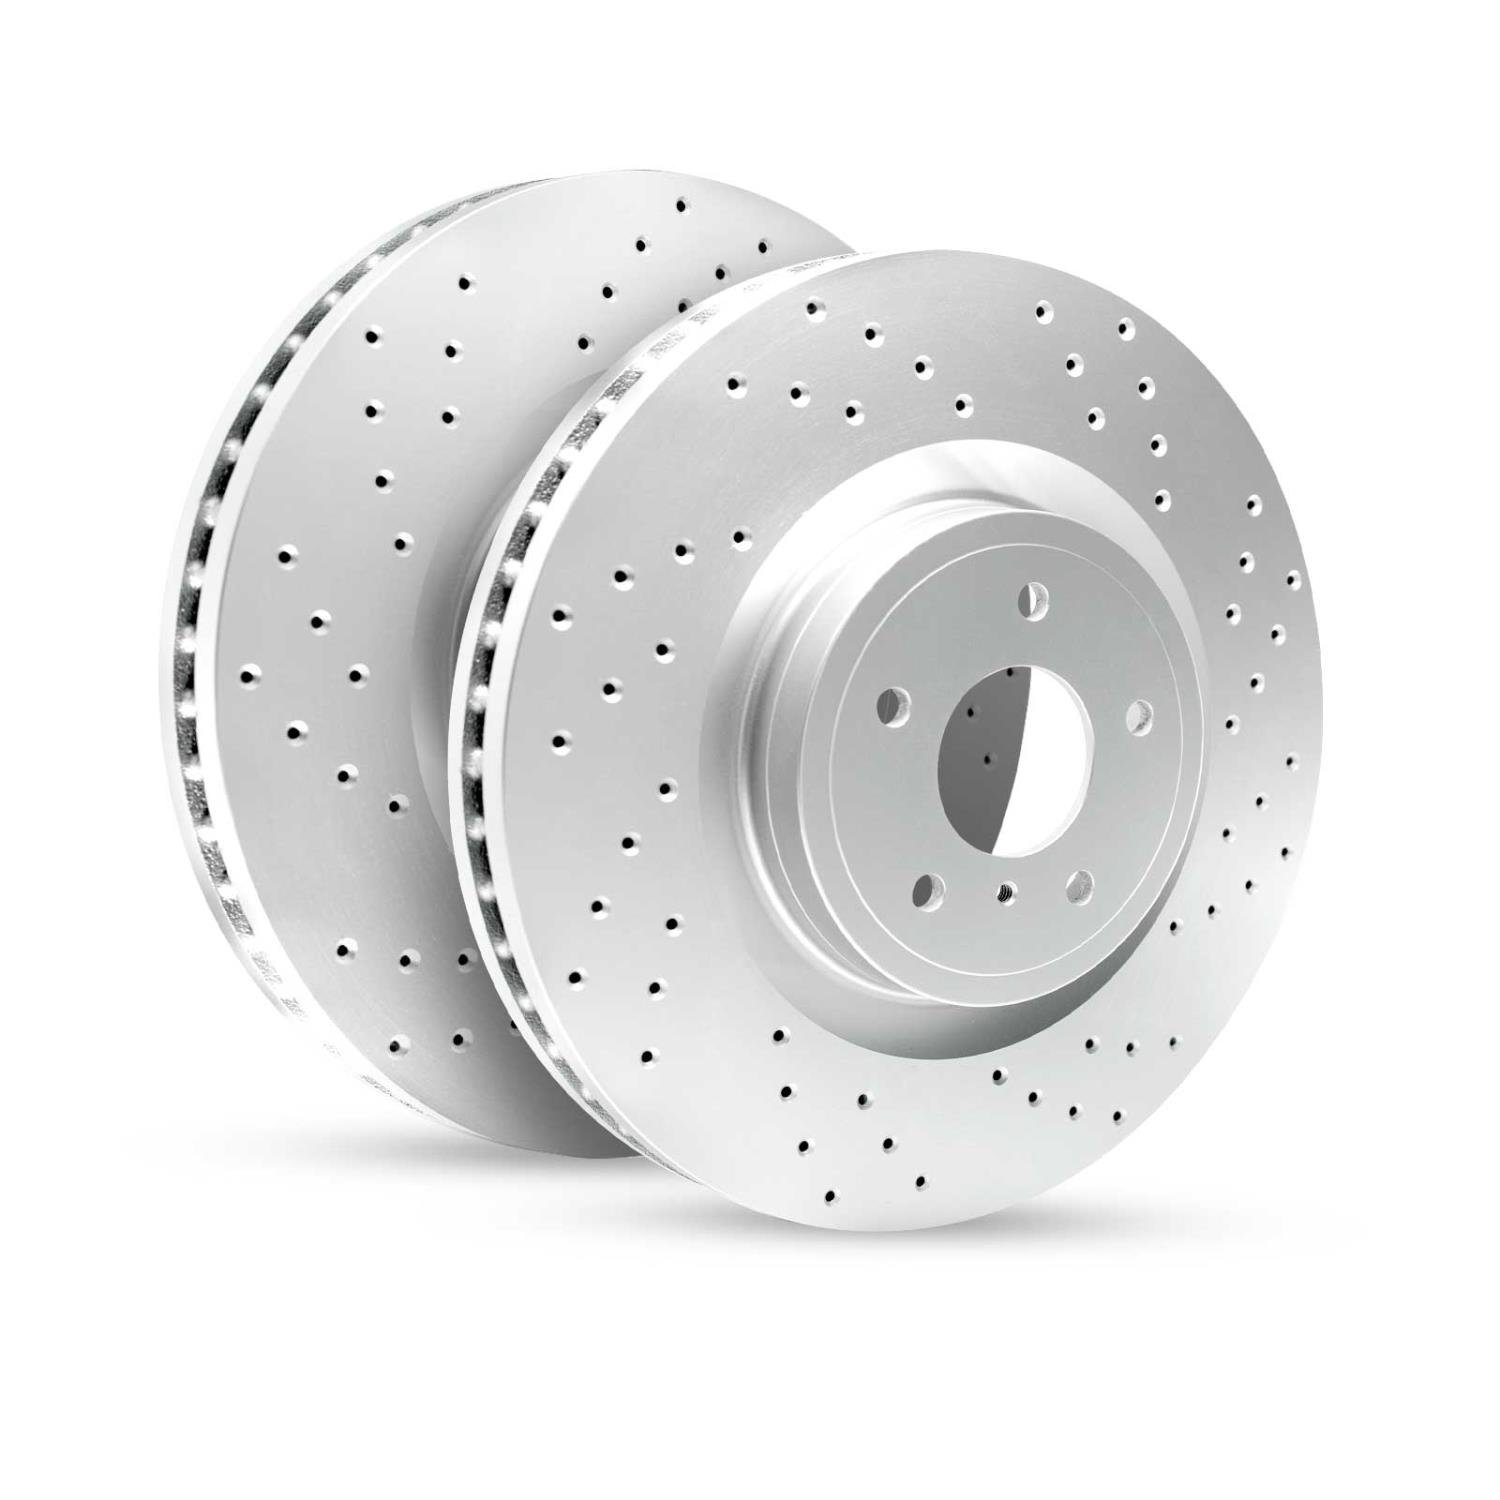 GEO-Carbon Drilled/Slotted Rotors, 2007-2017 Fits Multiple Makes/Models, Position: Rear